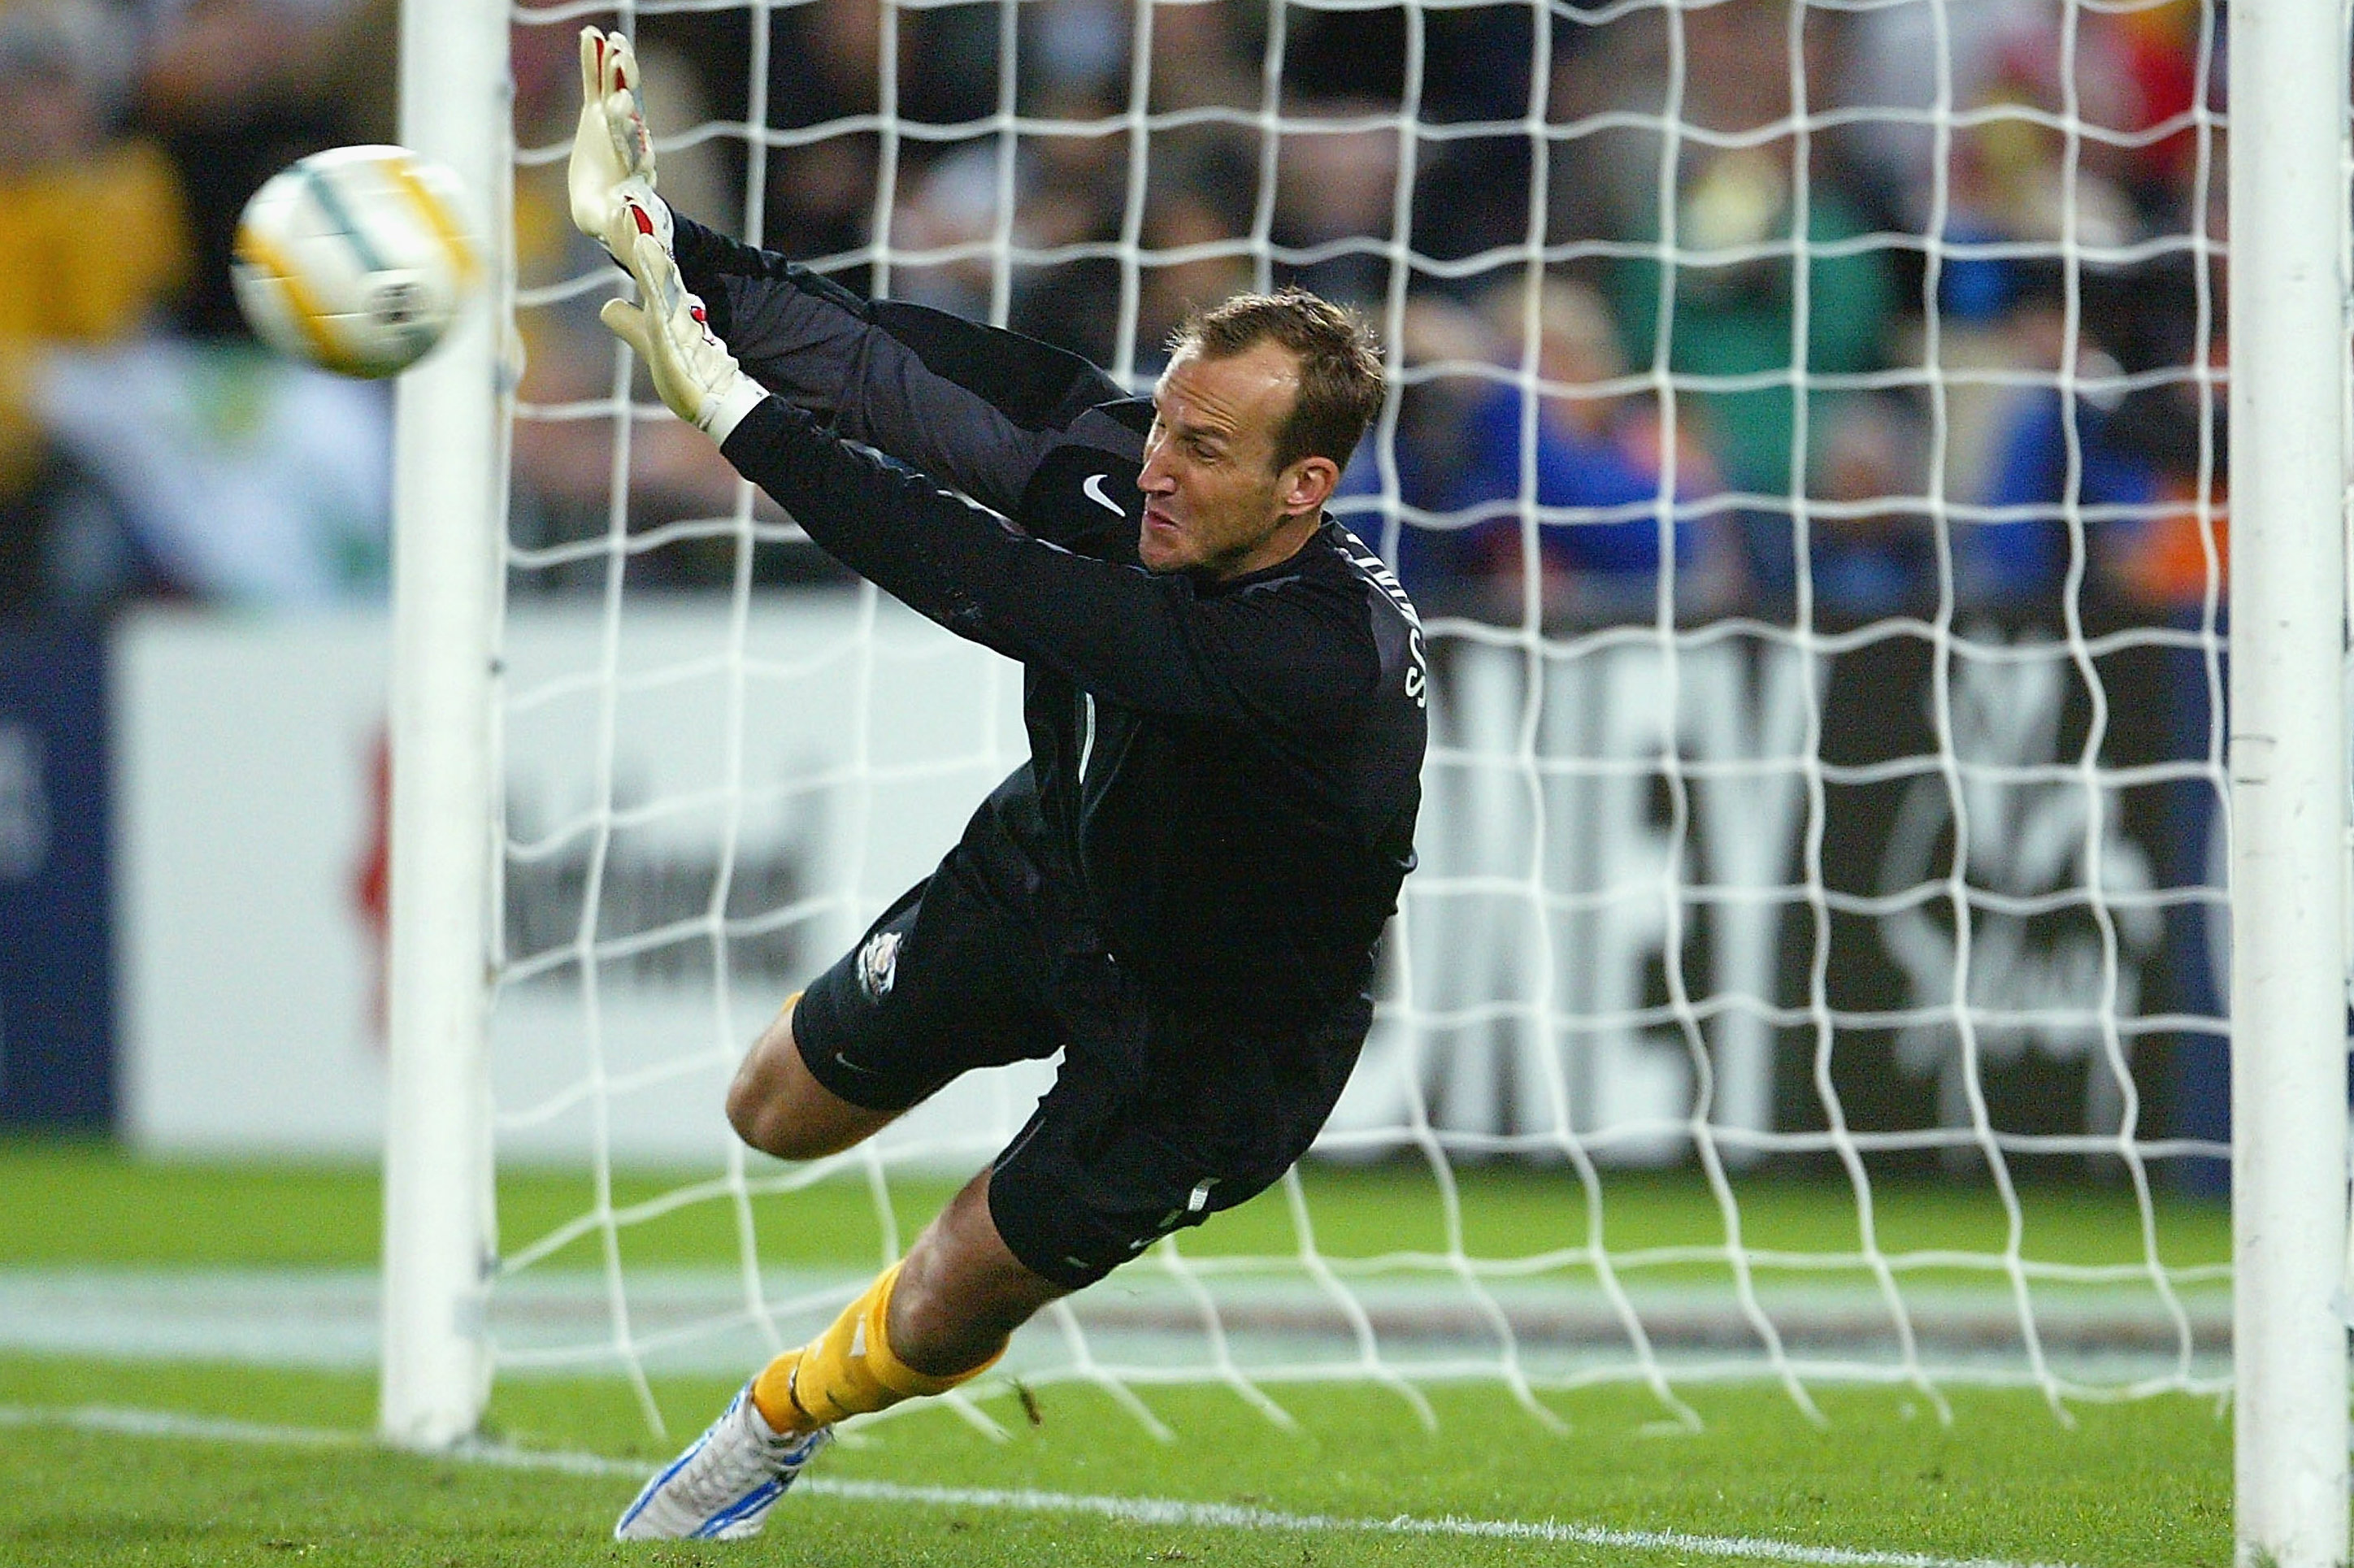 Mark Schwarzer makes a save in the shootout against Uruguay in 2005.